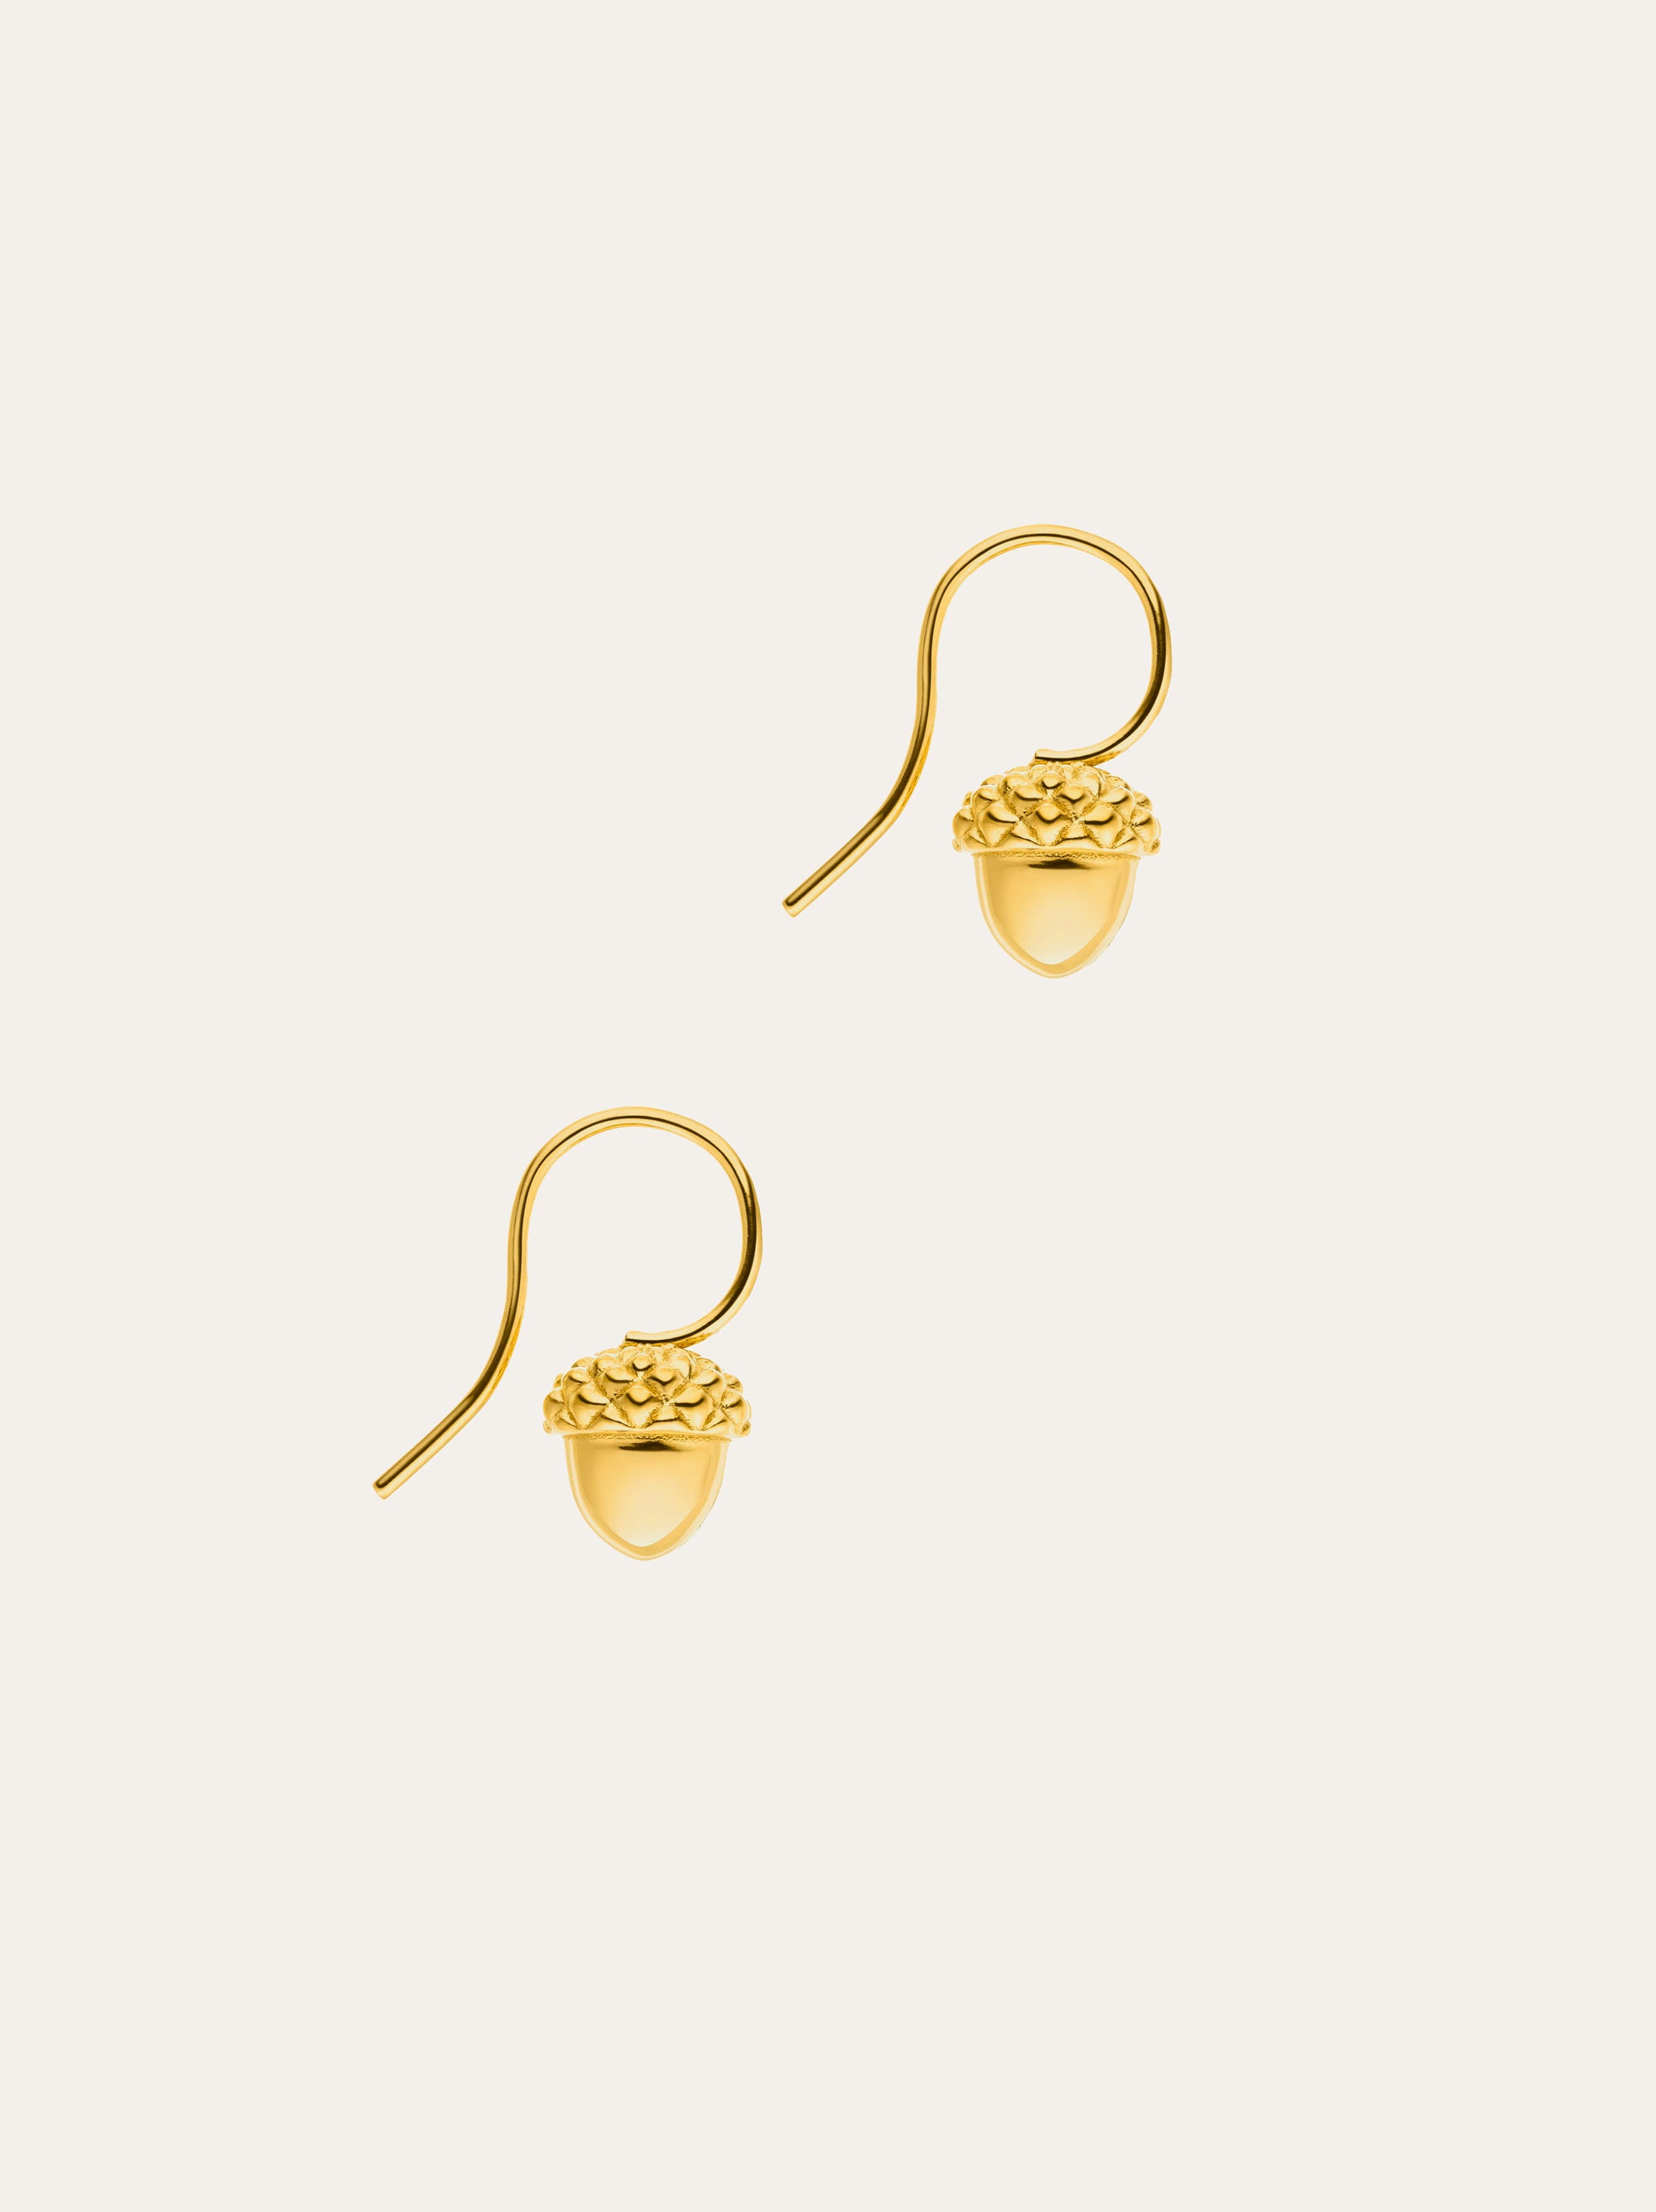 Idamari Acorn Drop Earrings: Sterling Silver with 18ct Gold Plating, Intricate Design, Radiant Finish. Lightweight and Elegant.